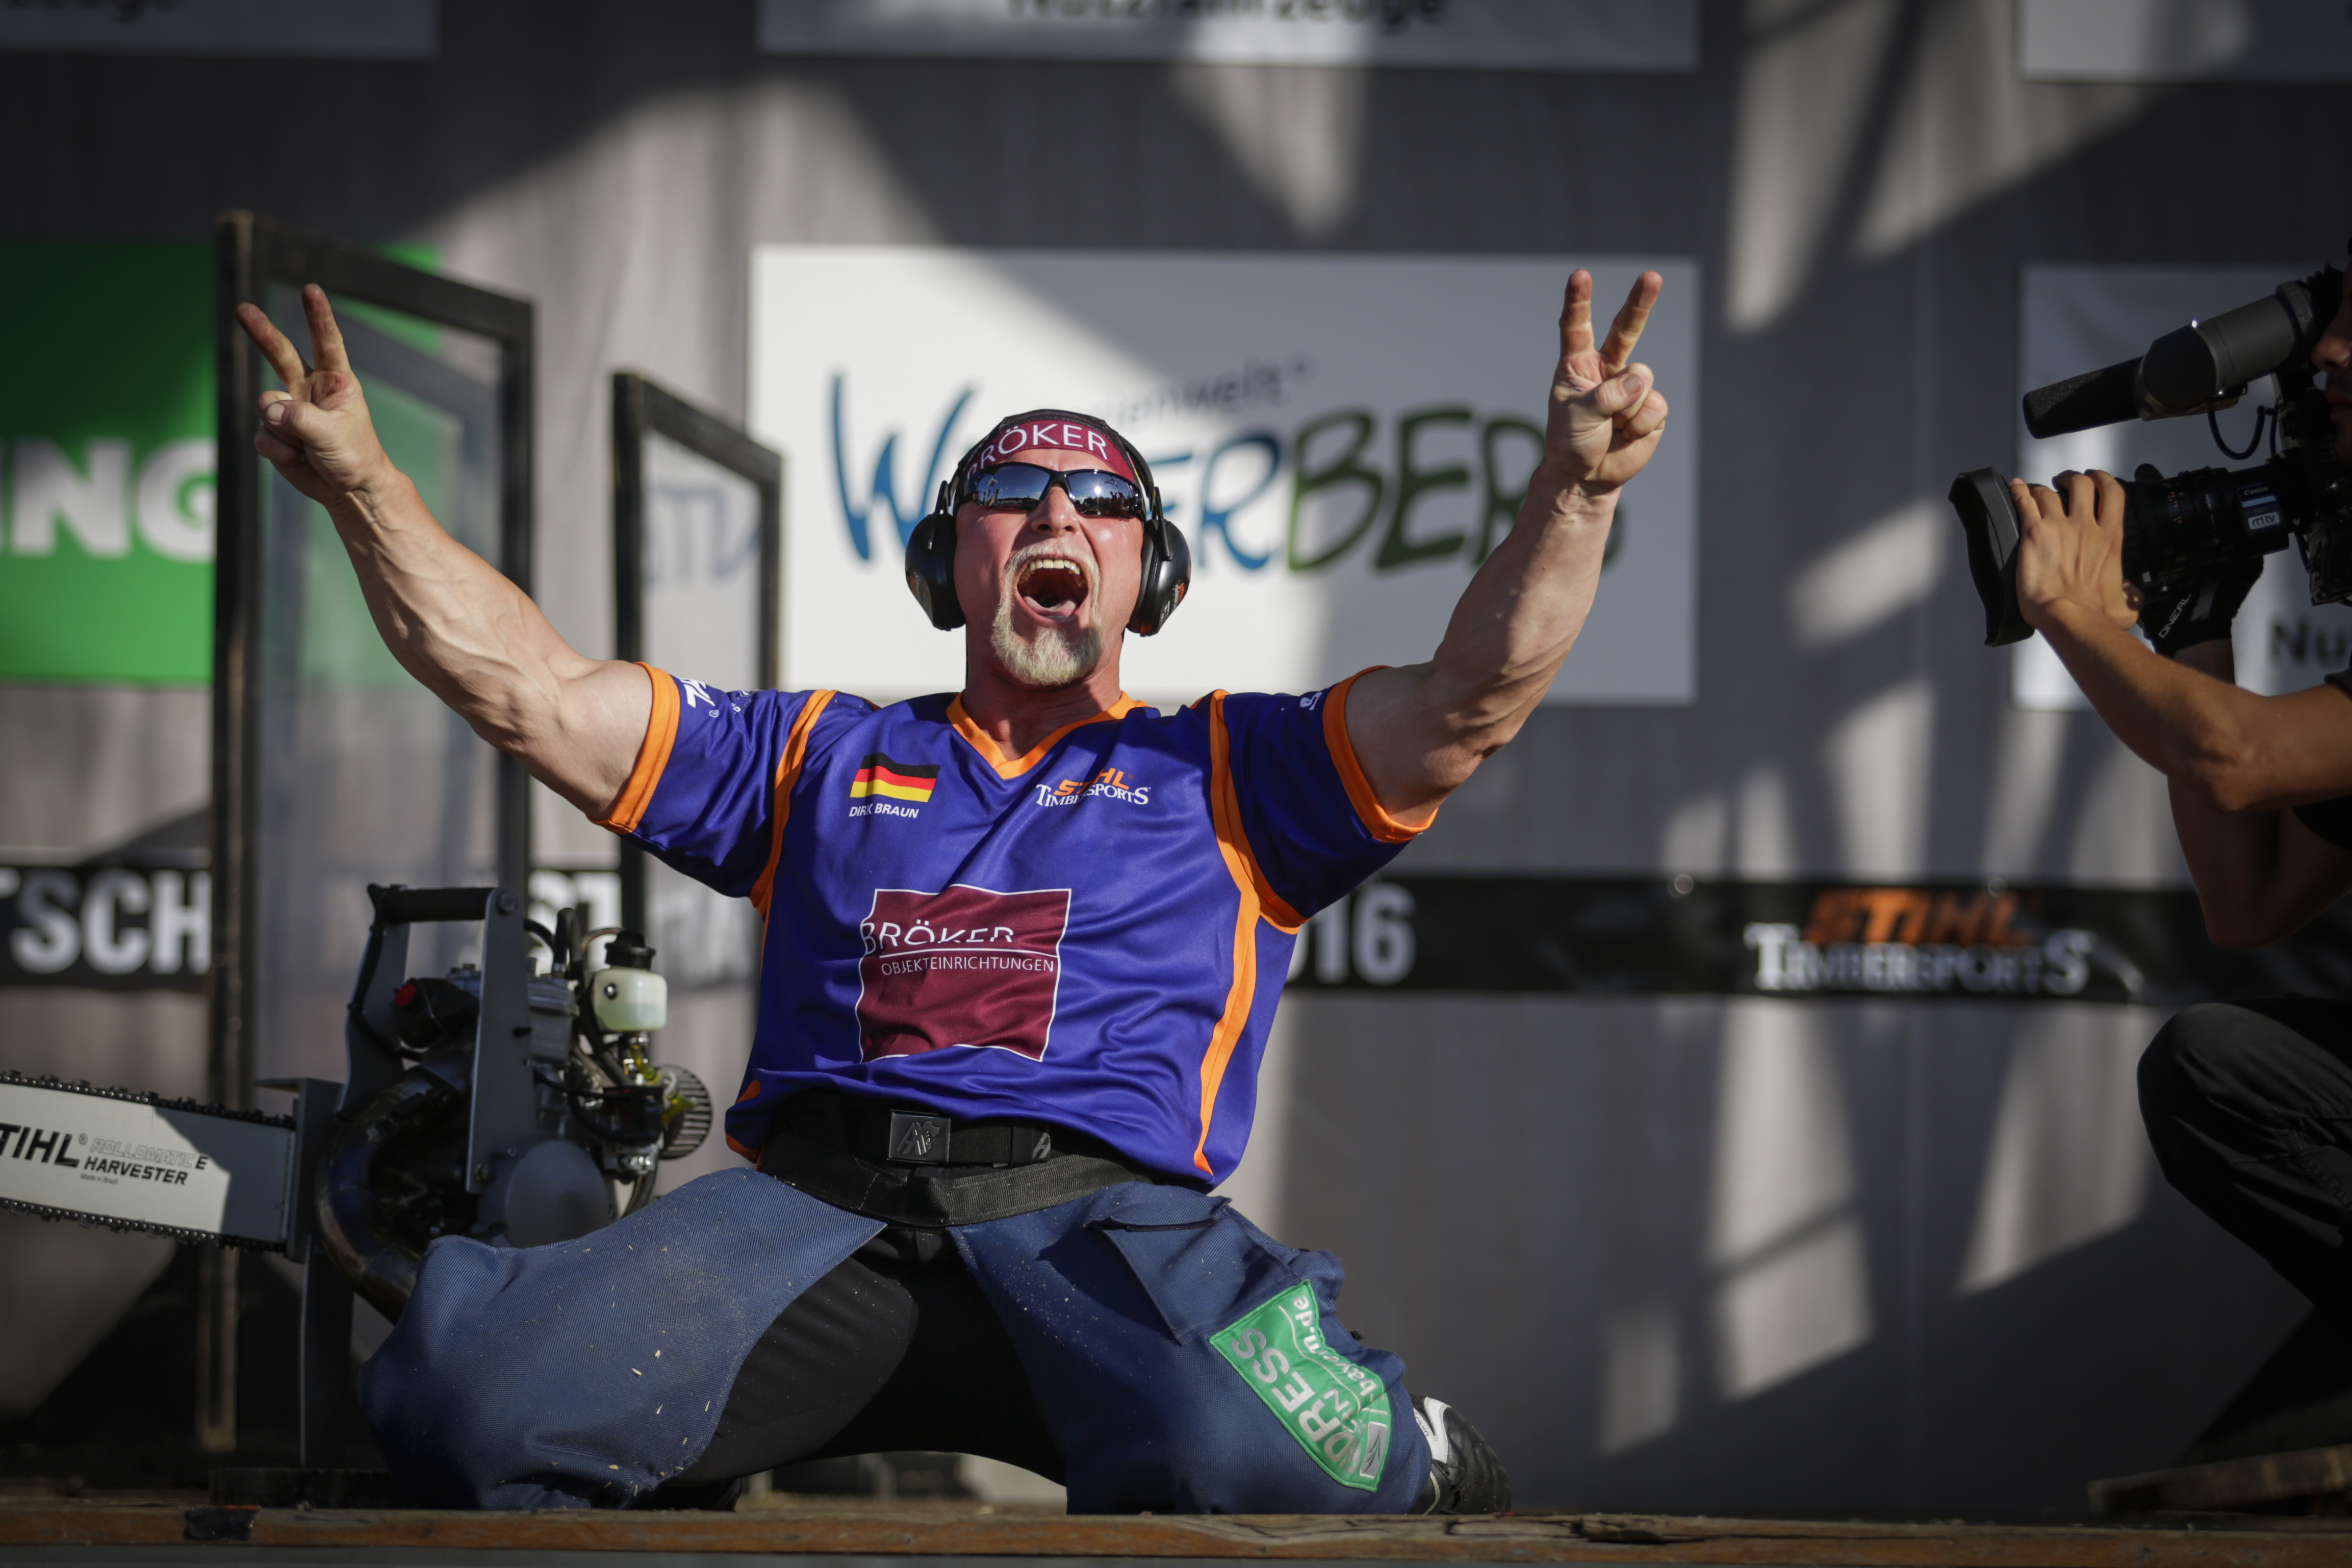 TIMBERSPORTS® athlete Dirk Braun died in 2021 in a tragic accident.